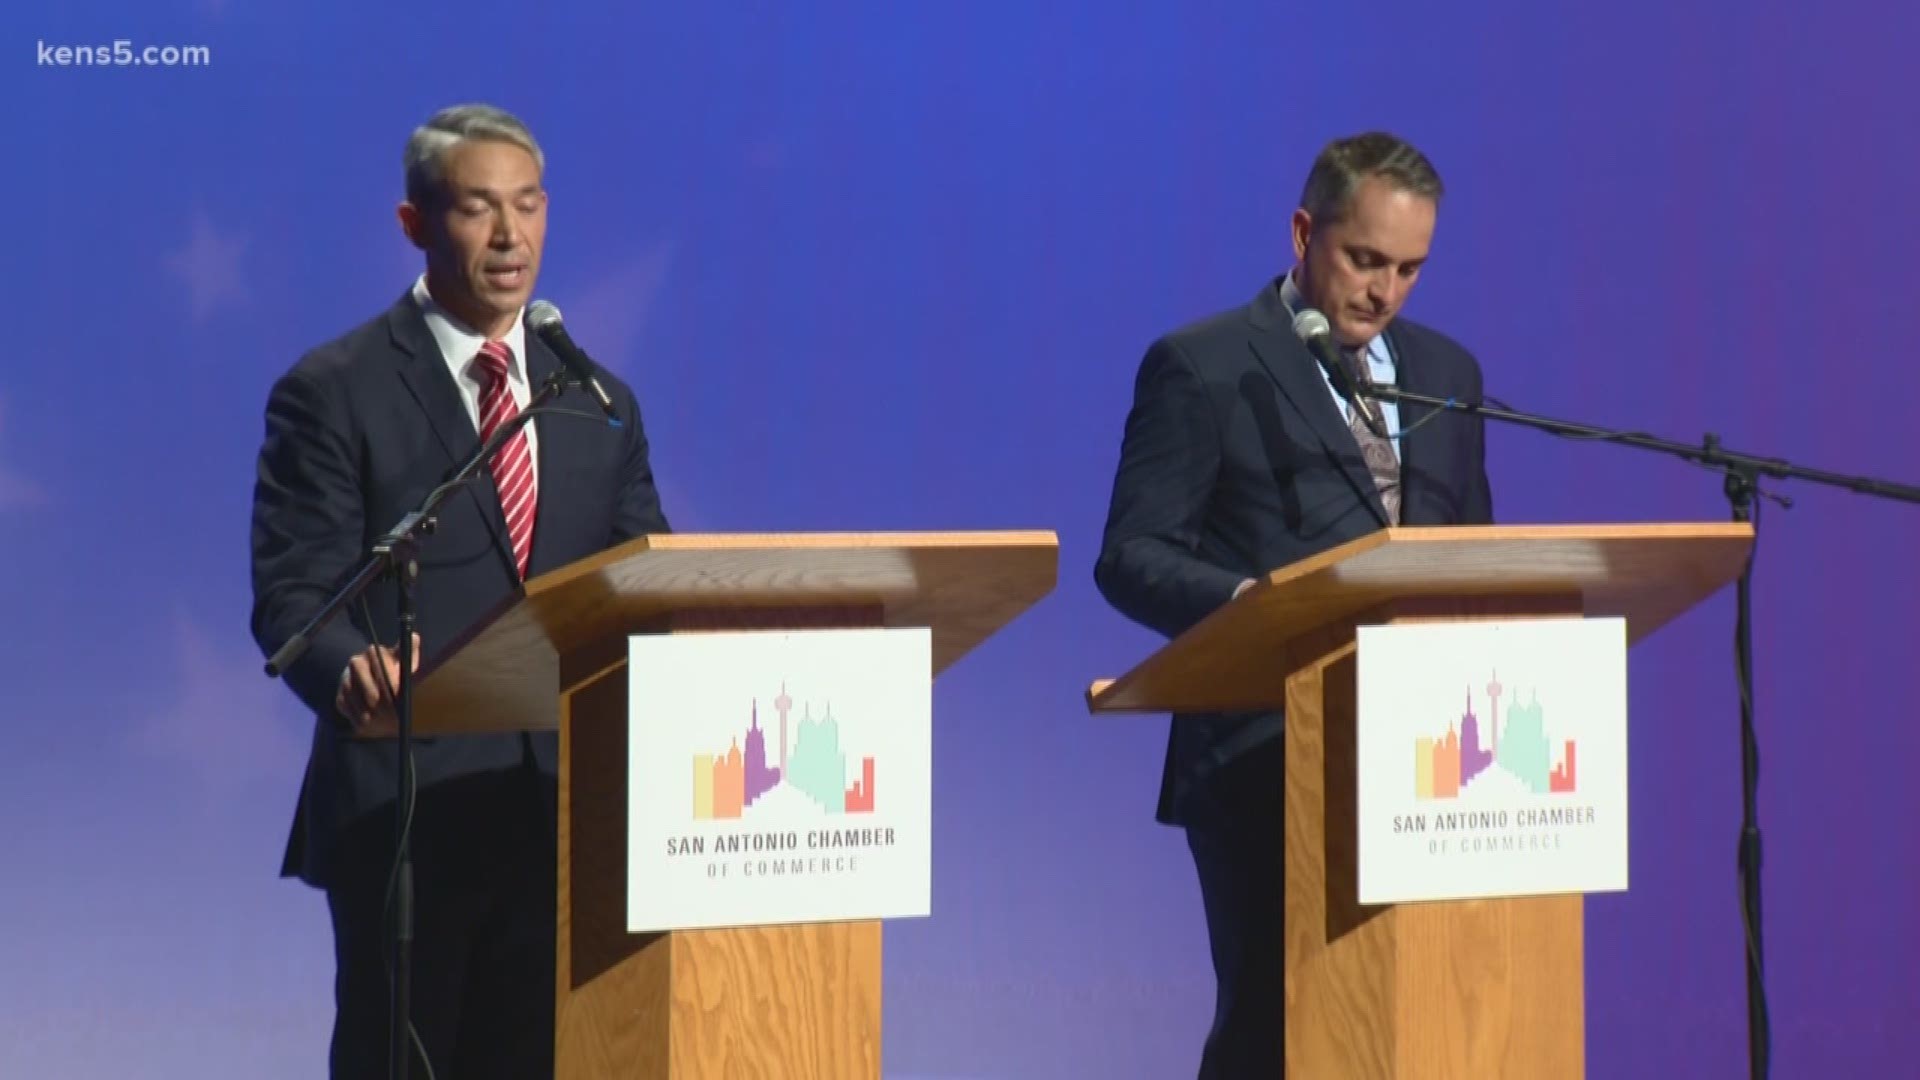 As with the rest of their campaigns, Thursday night's debate was a tense one.